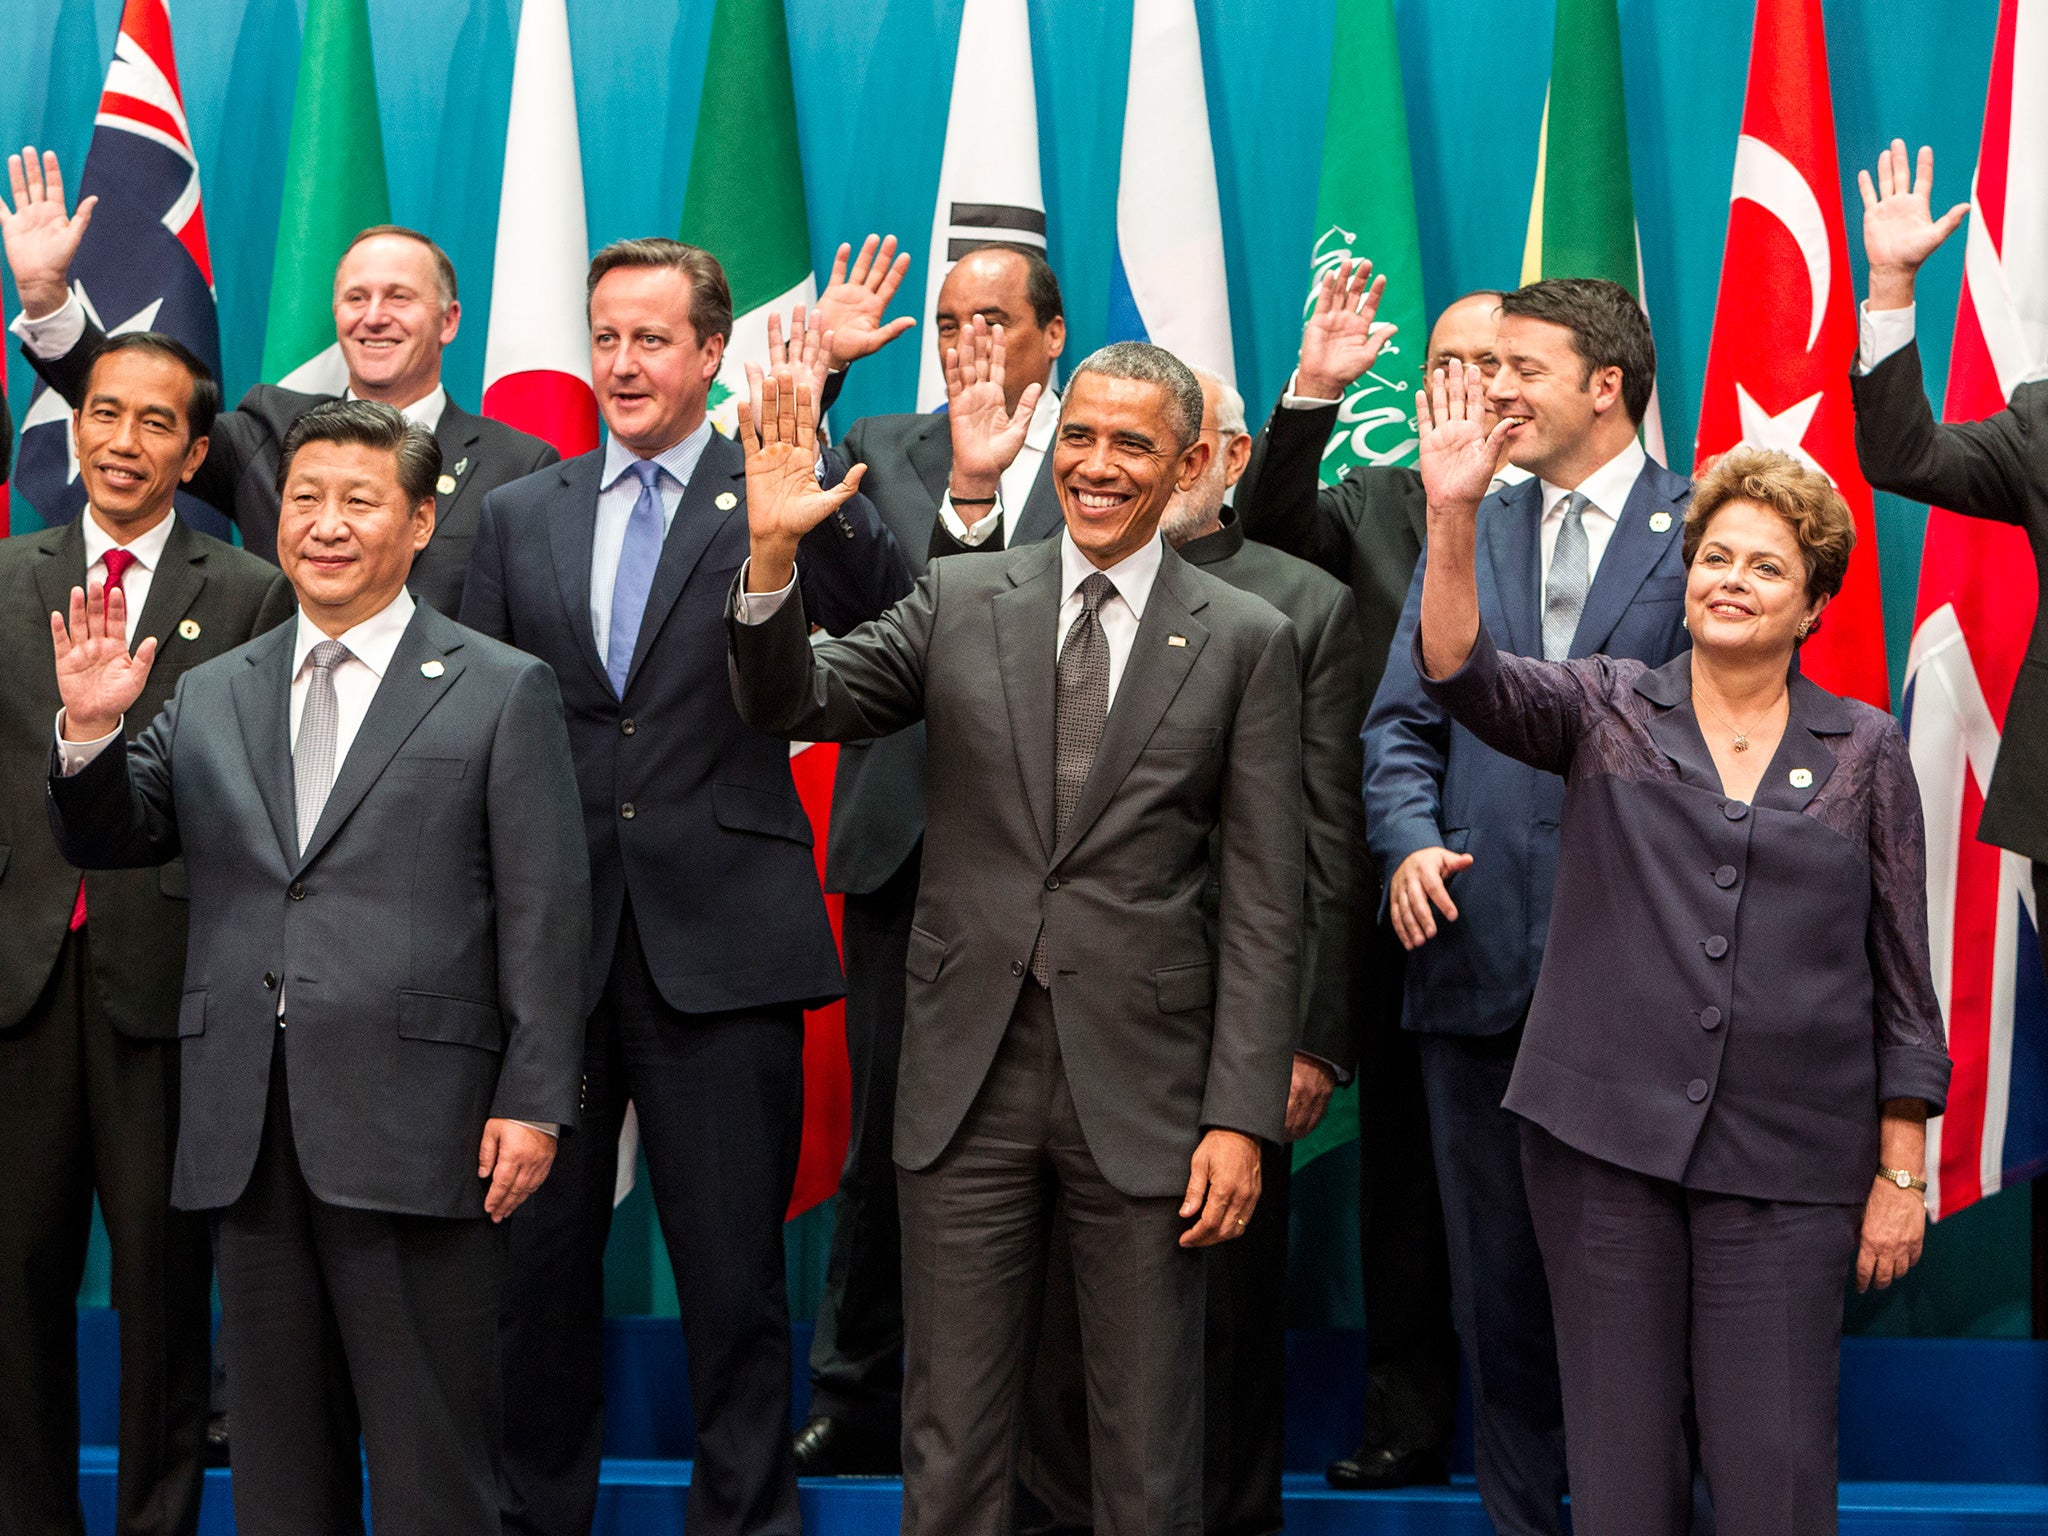 World leaders congregate at last year's G20 summit